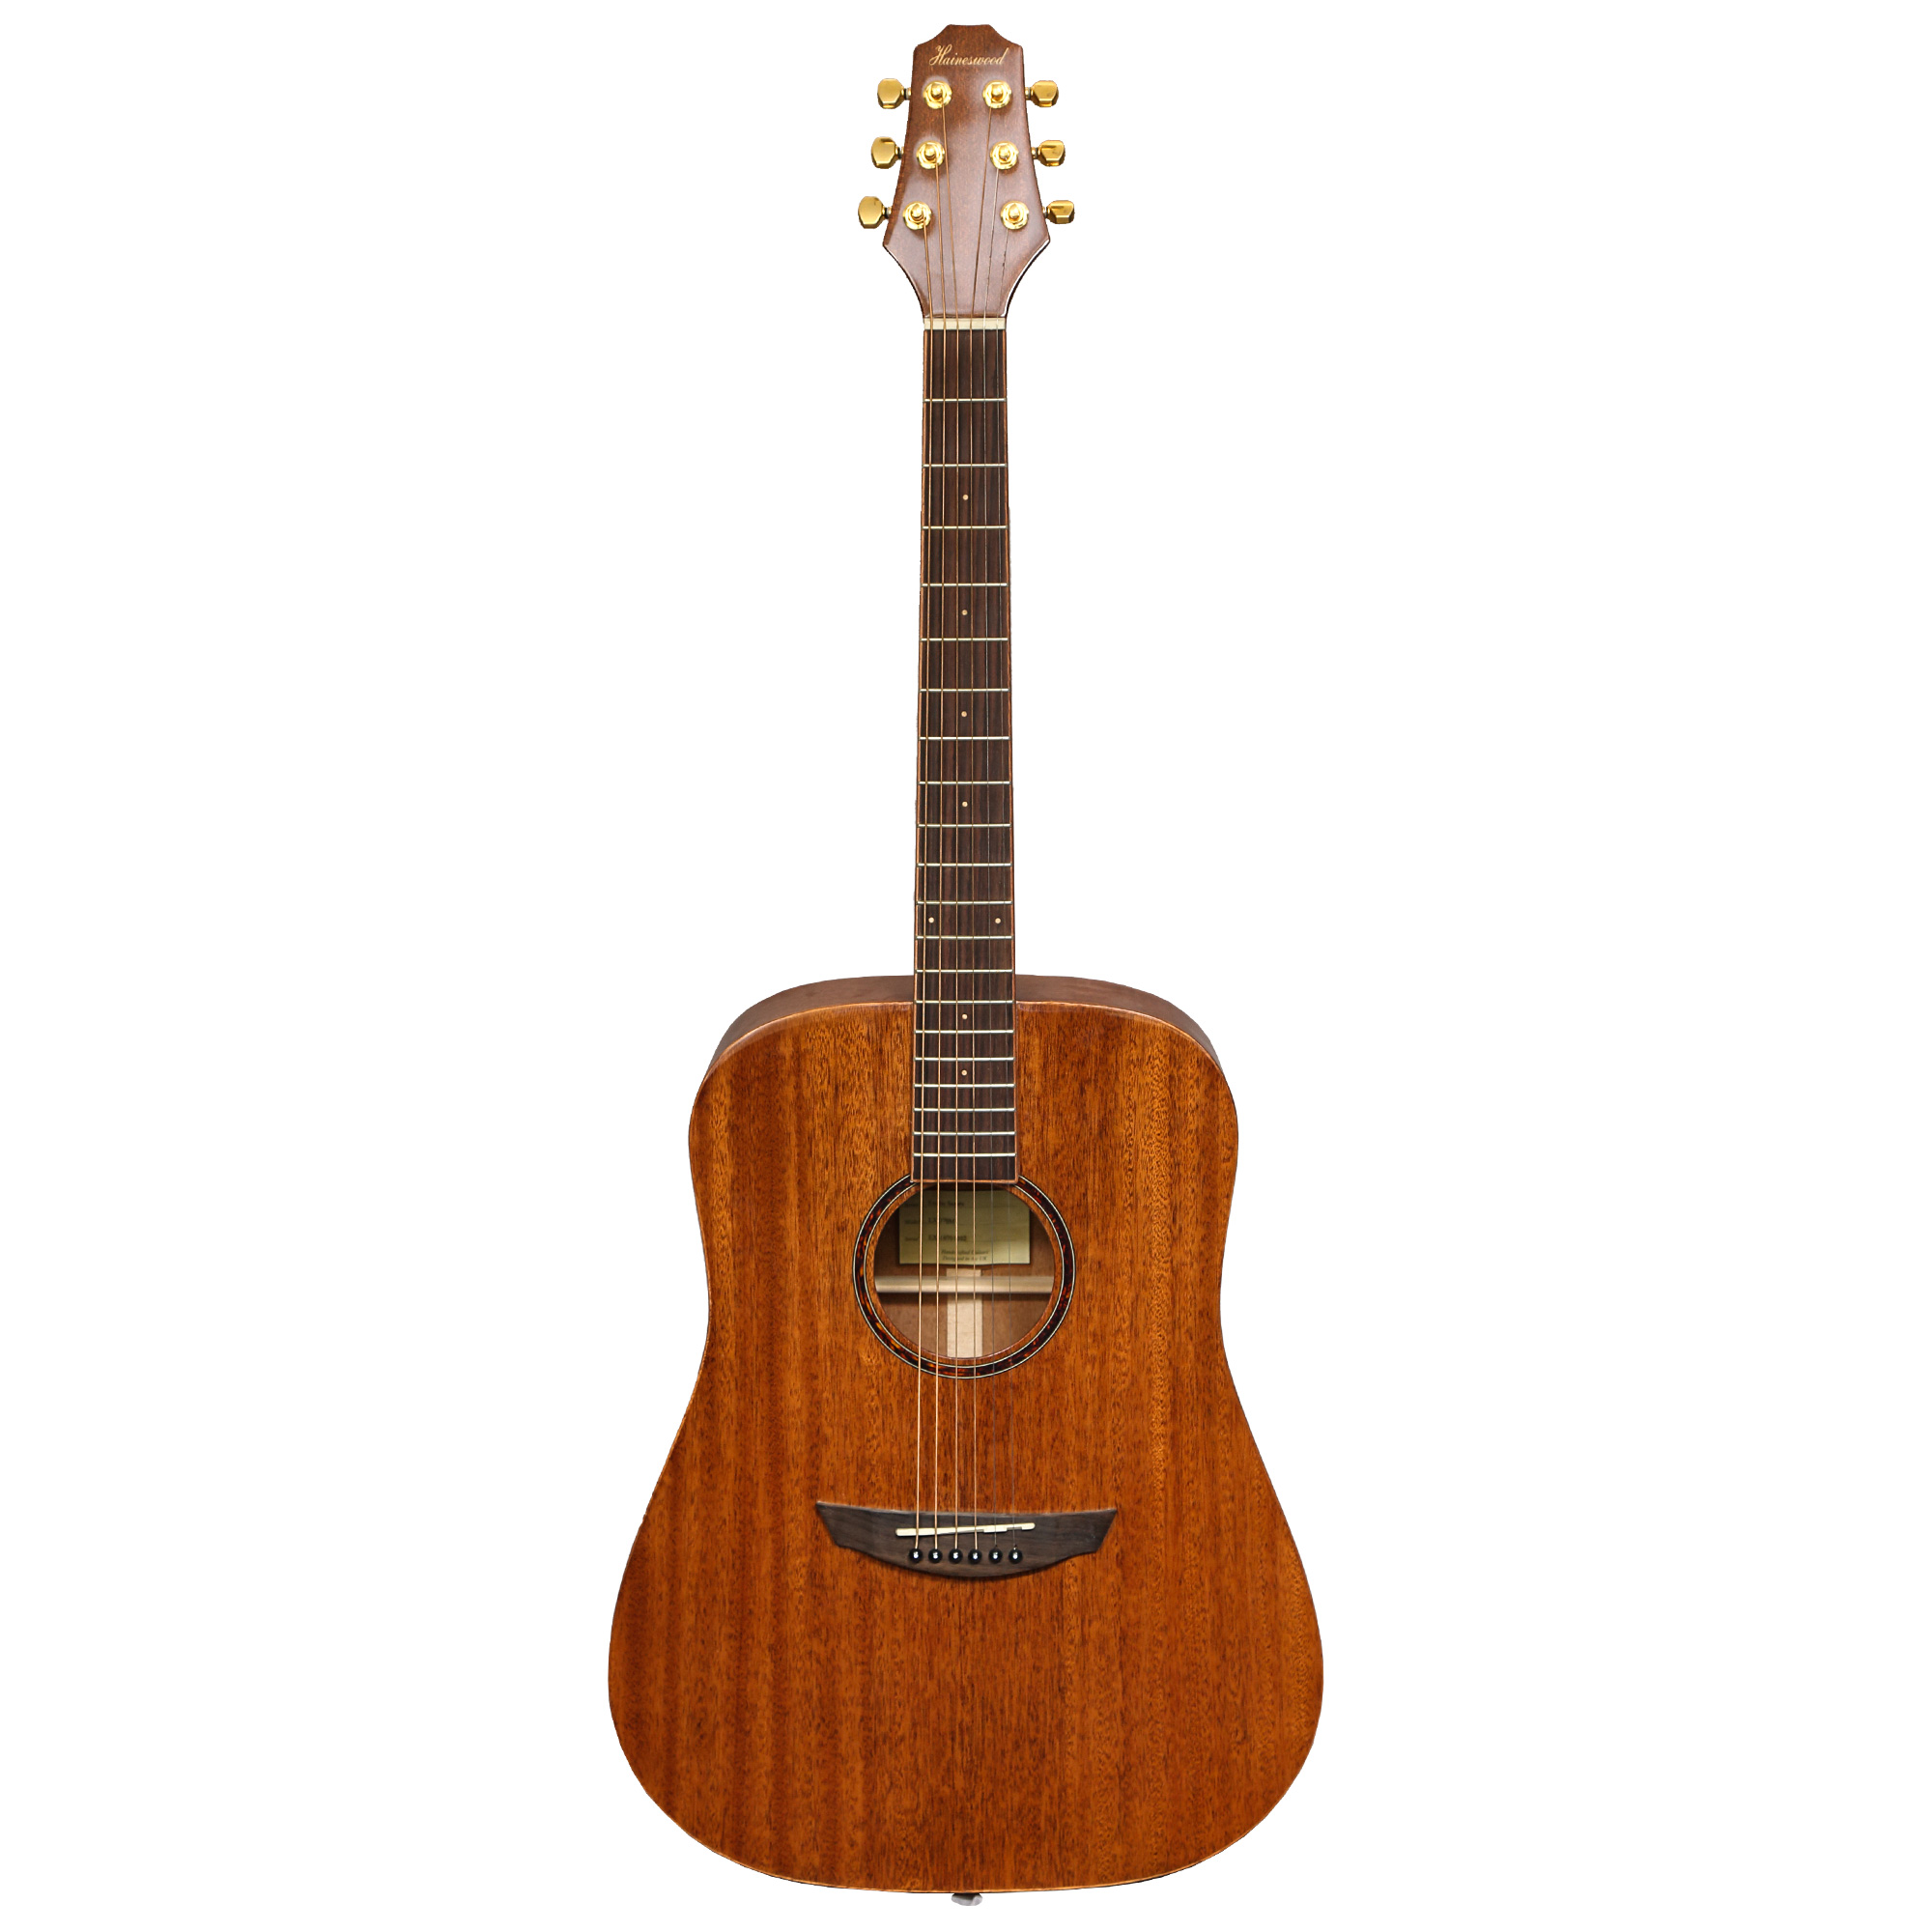 Haineswood Exotic EXD70M Dreadnought